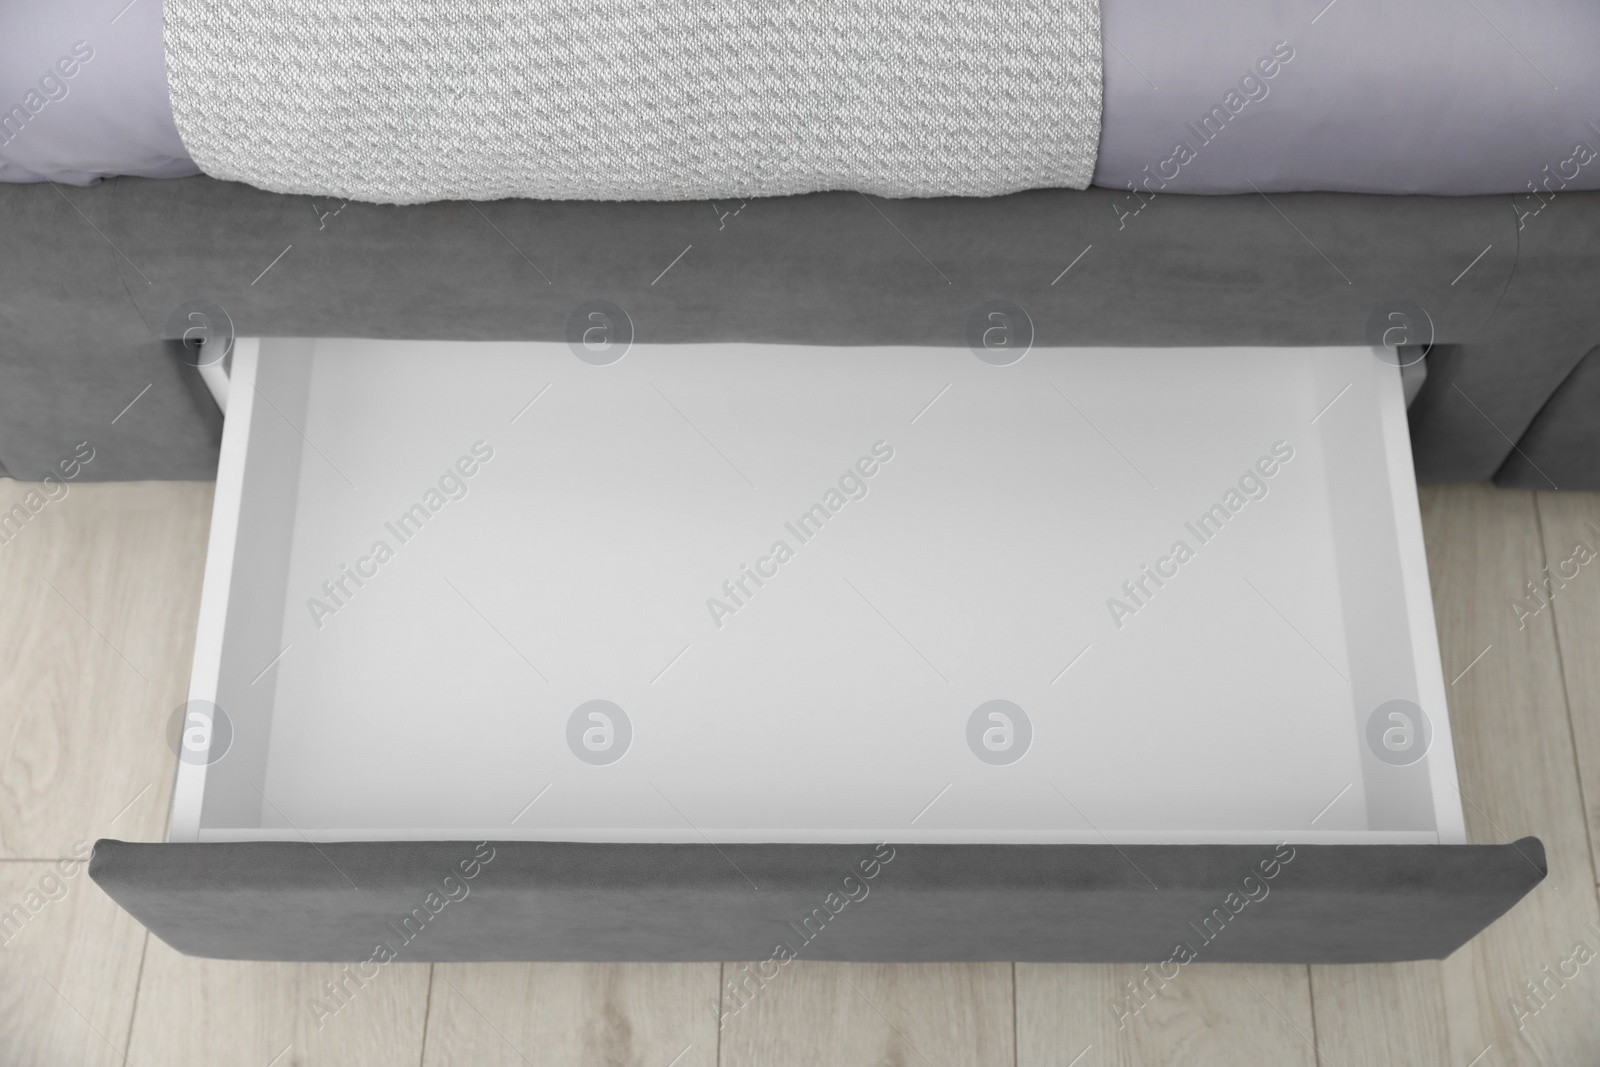 Photo of Storage drawer for bedding under modern bed in room, above view